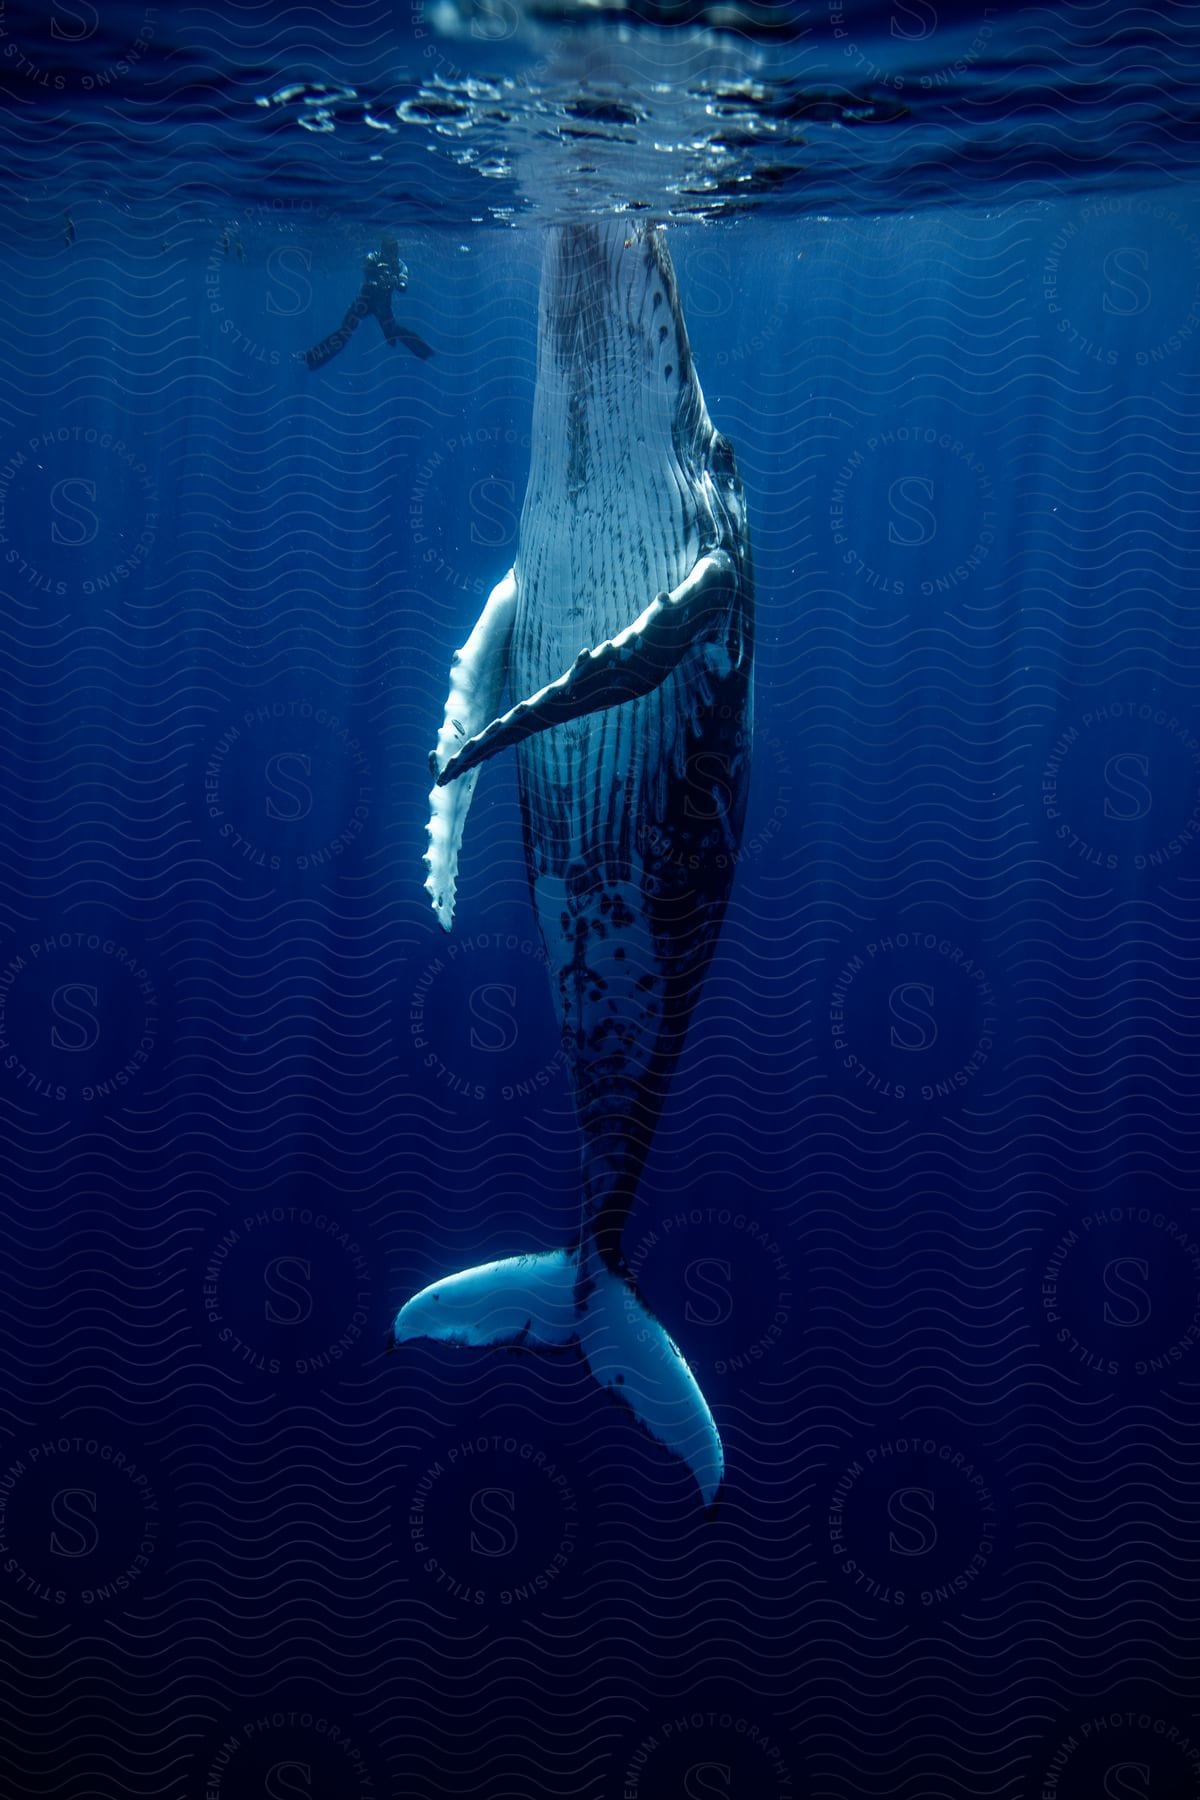 A humpback whale poking its mouth above the water as a man under the surface films it.